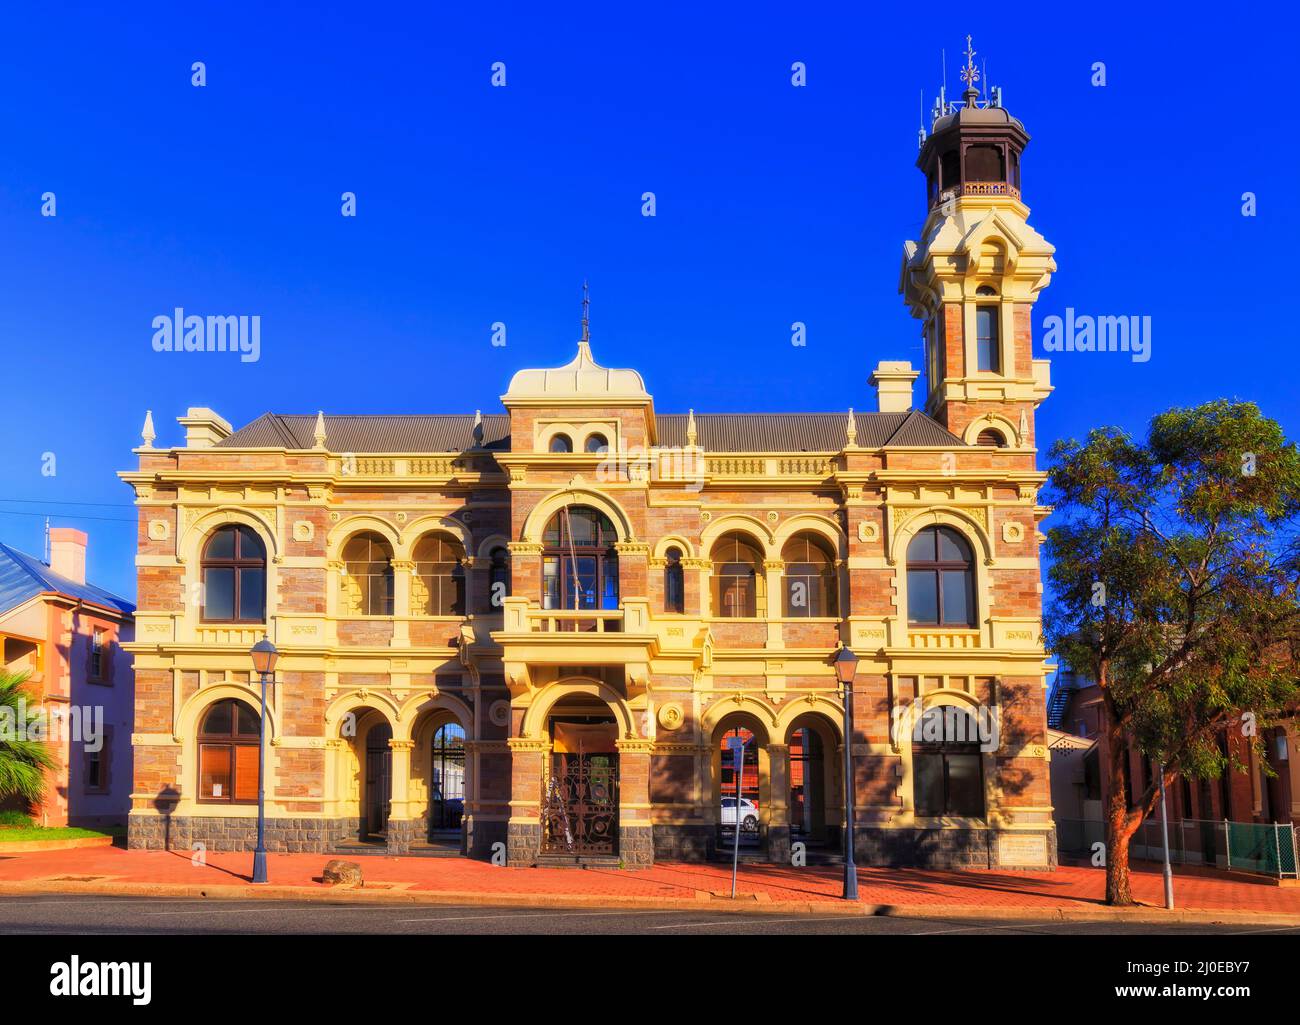 Historic heritage building of old town hall local government on Argent street in Broken hill city of australian outback. Stock Photo